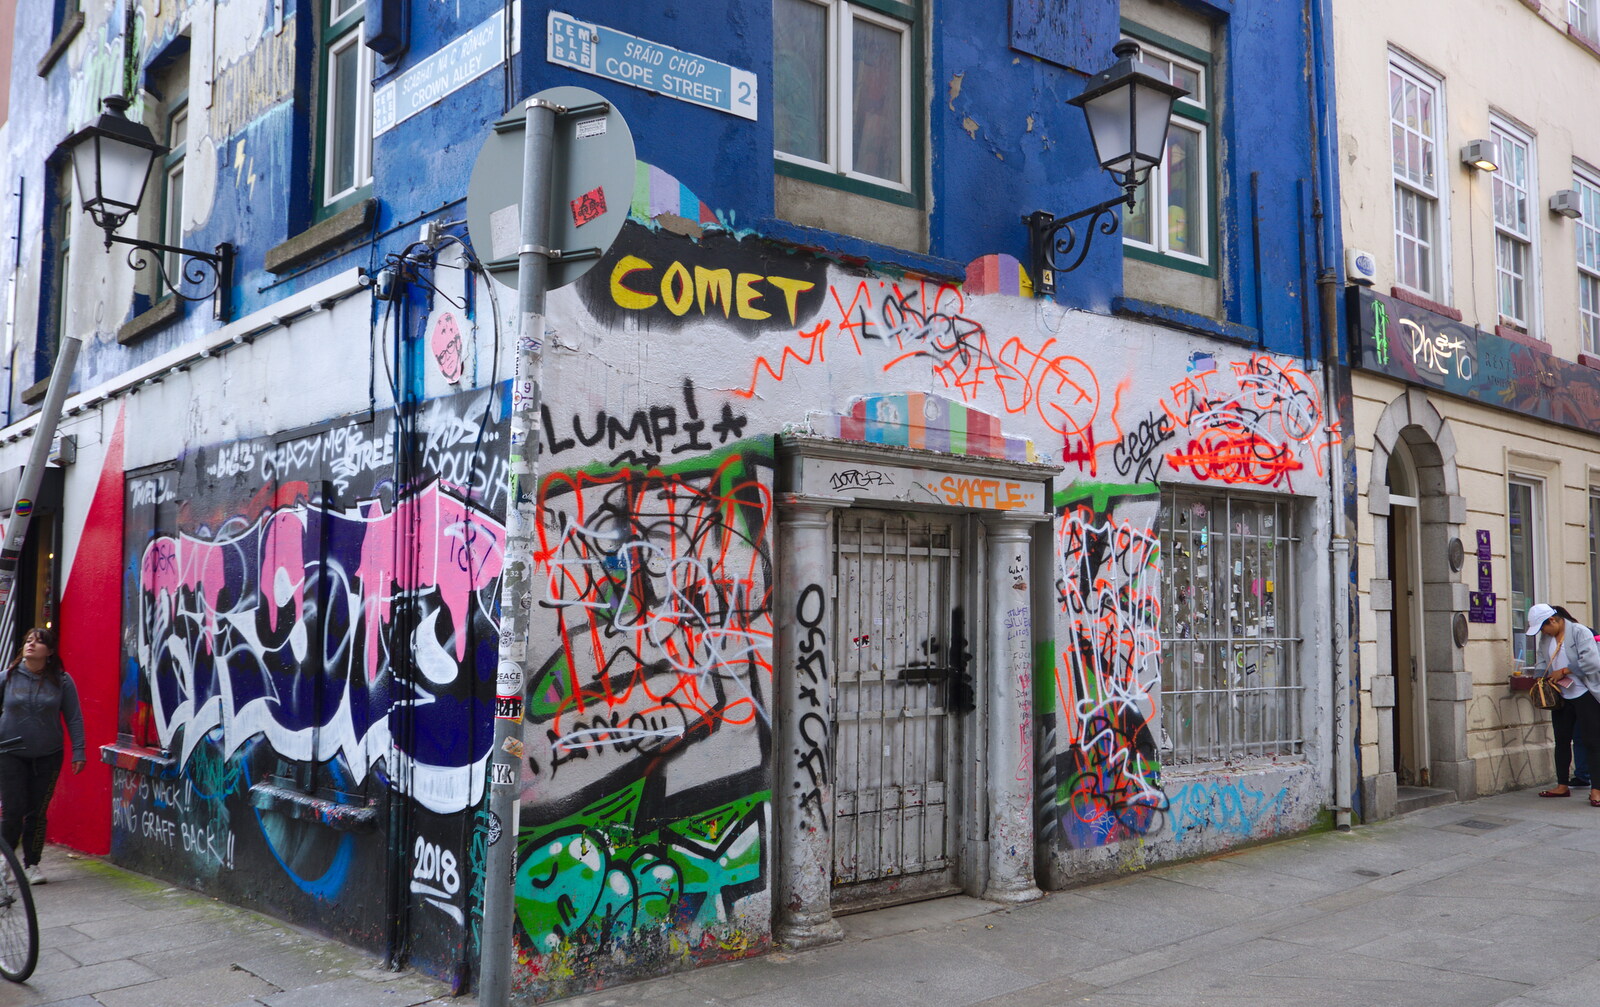 A graffiti-covered shop from Busking in Temple Bar, Dublin, Ireland - 12th August 2019